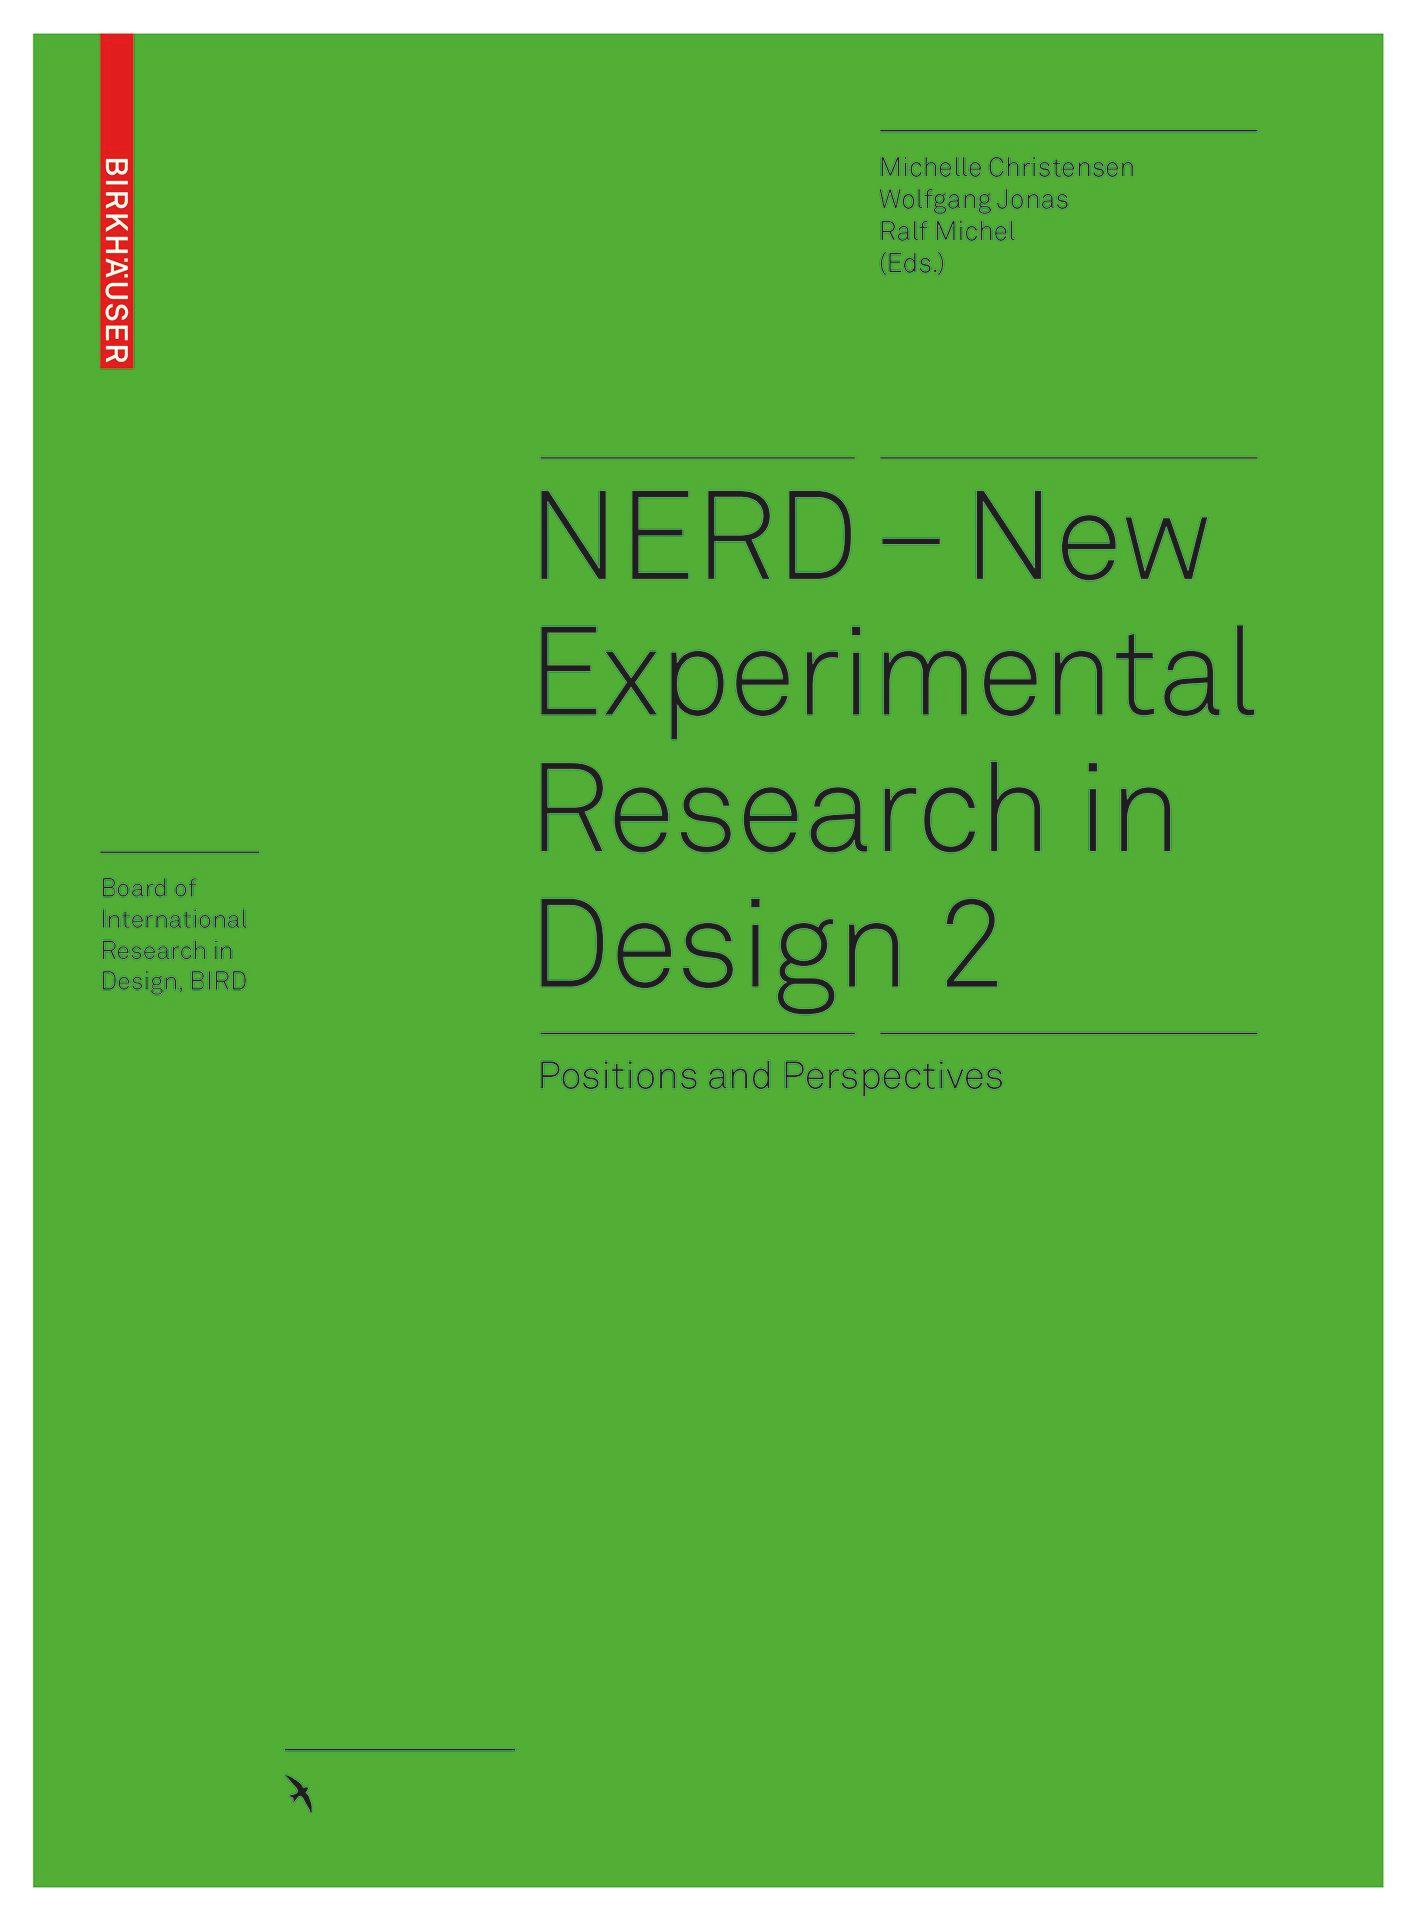 NERD - New Experimental Research in Design 2's cover